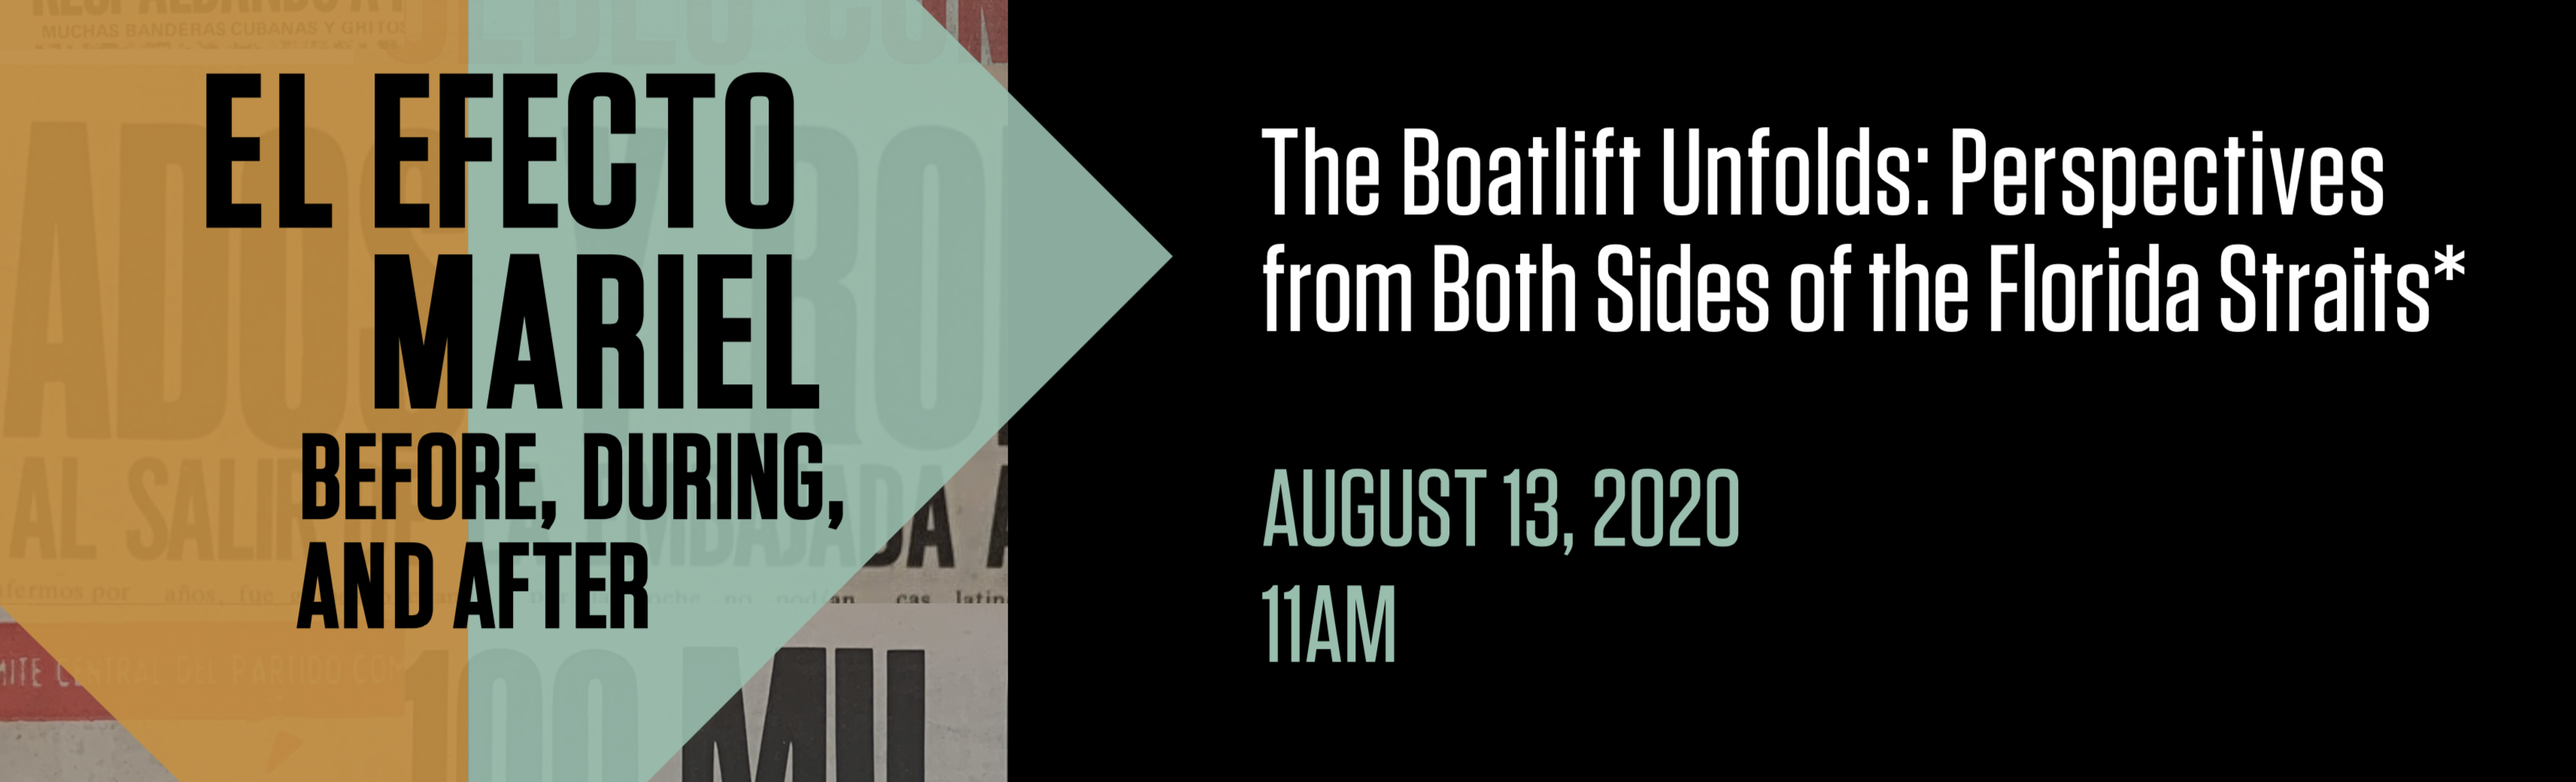 The Boatlift Unfolds: Perspectives from Both Sides of the Florida Straits